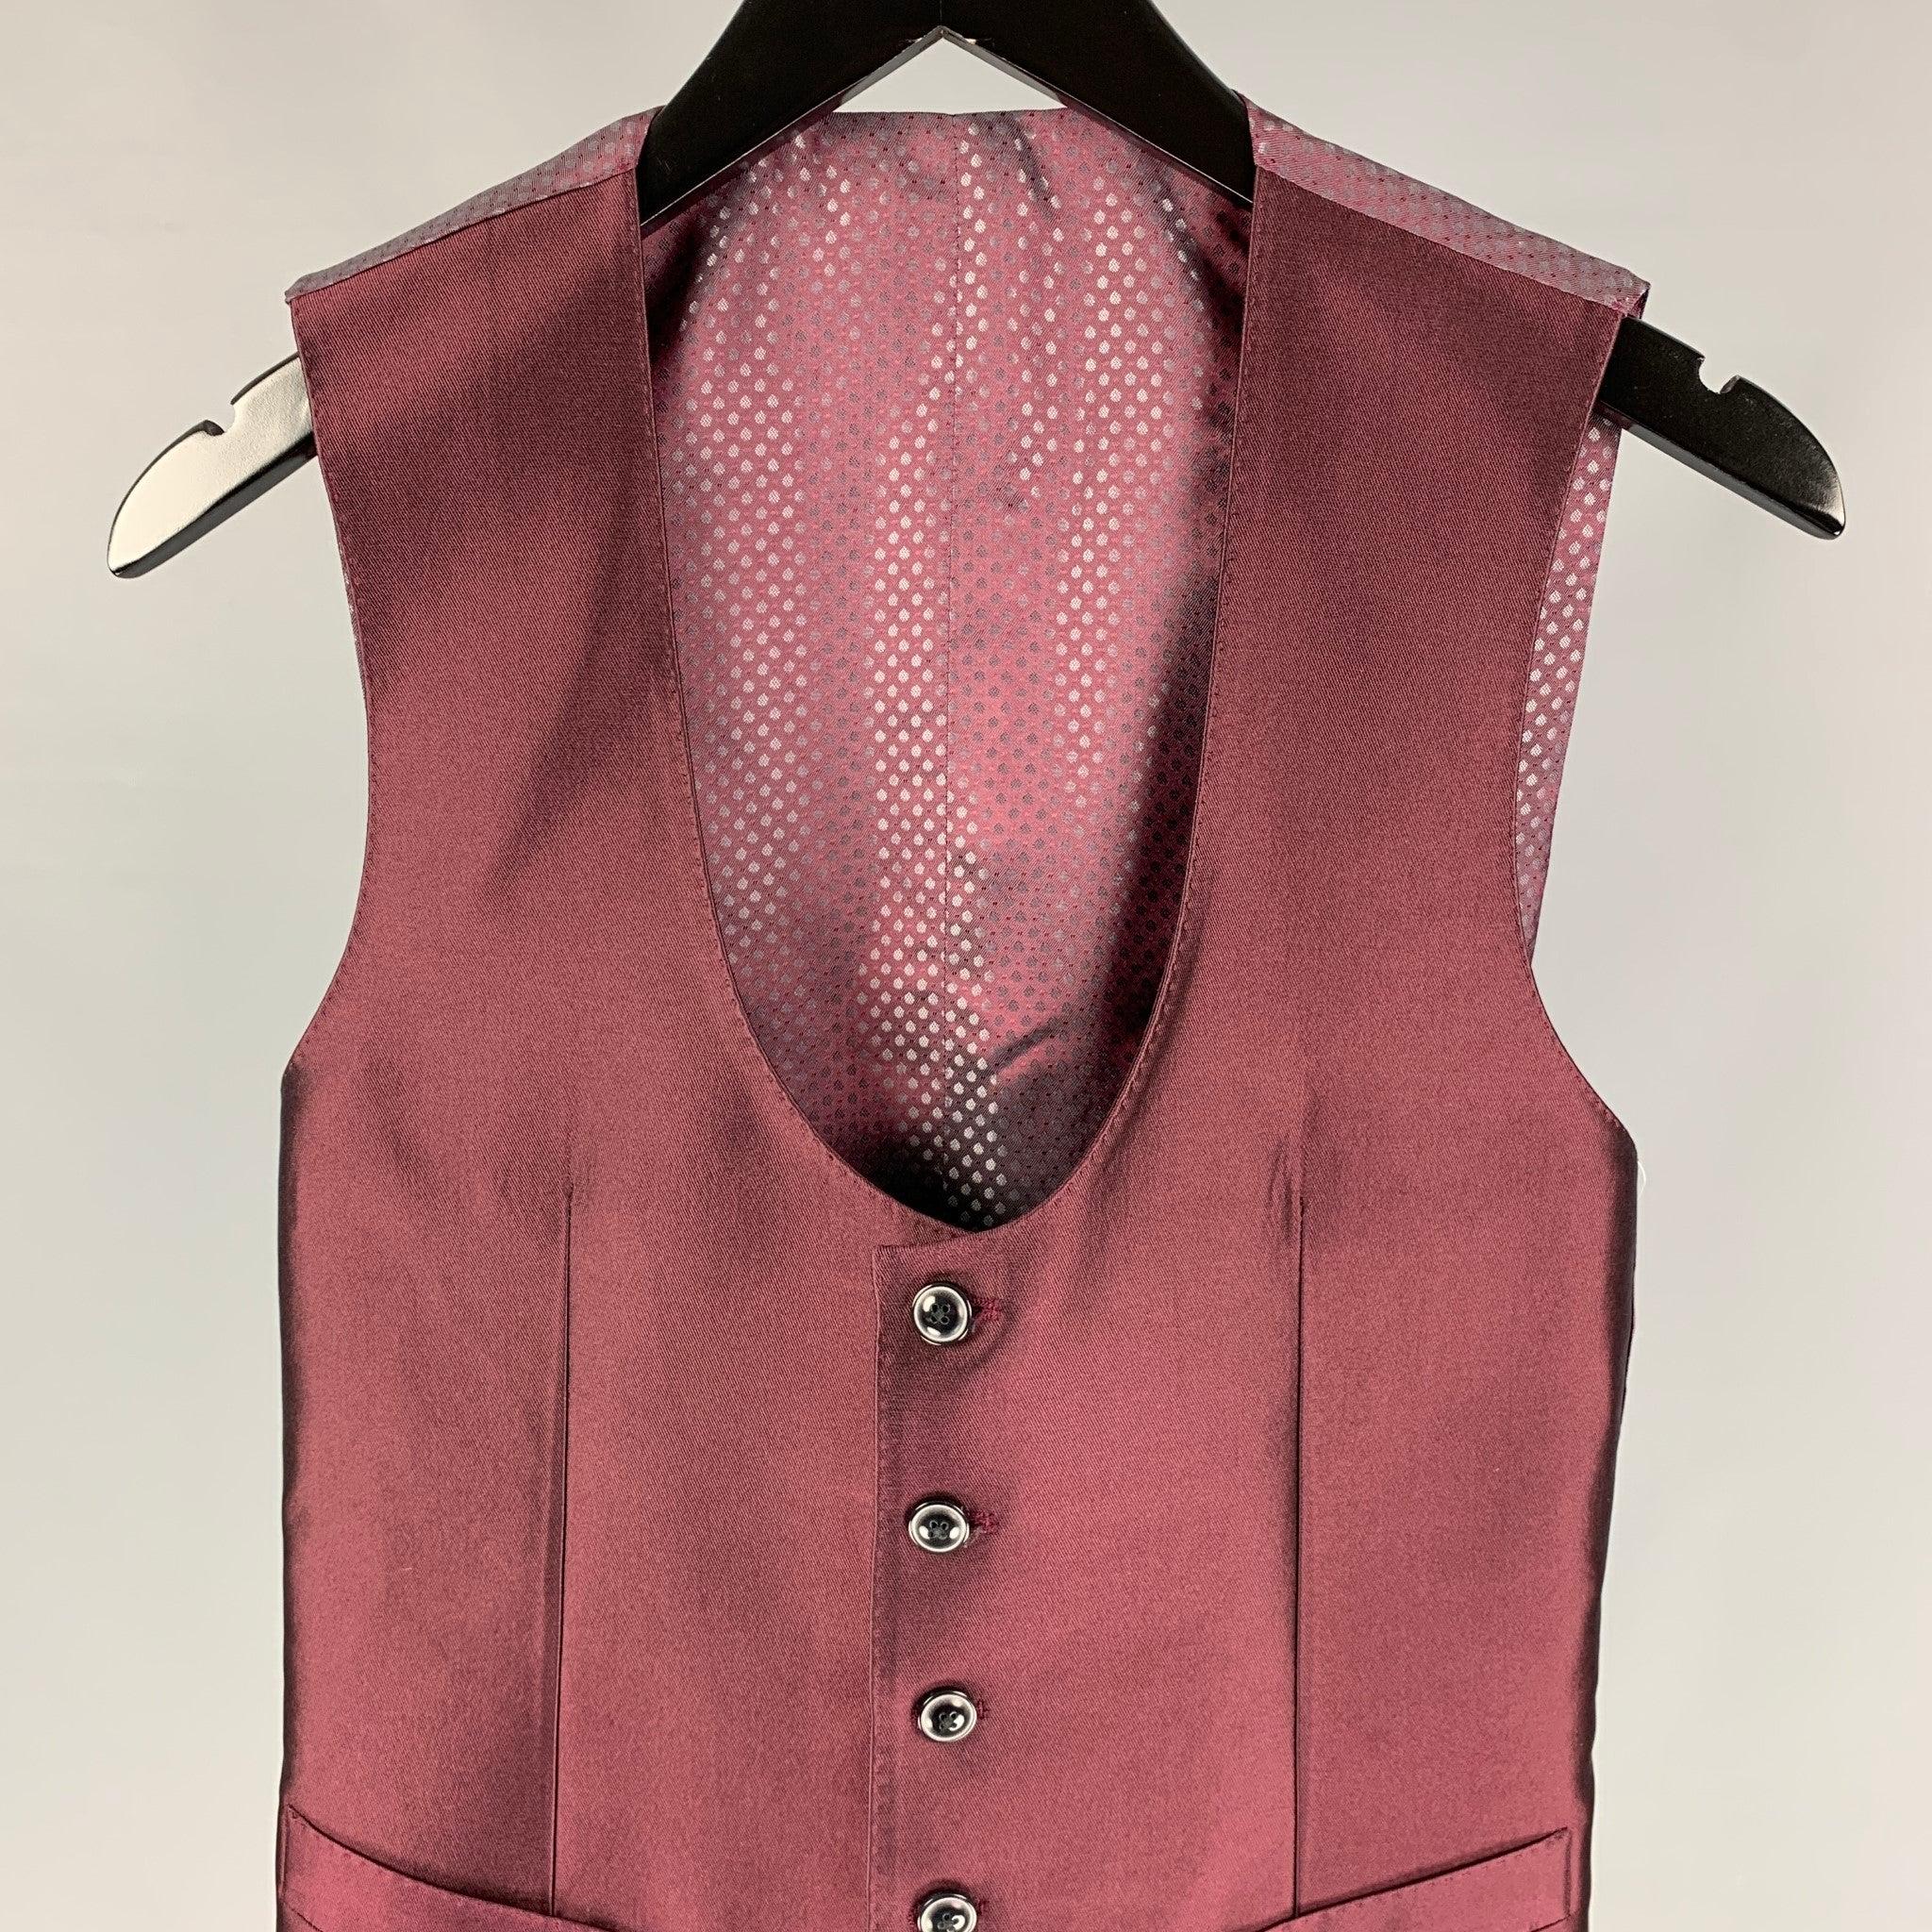 DOLCE & GABBANA dress vest comes in a burgundy silk featuring a back belt, front pockets, and a buttoned closure. Made in Italy.
Excellent
Pre-Owned Condition. 

Marked:   44 

Measurements: 
 
Shoulder: 13 inches Chest: 34 inches  Length: 22 inches